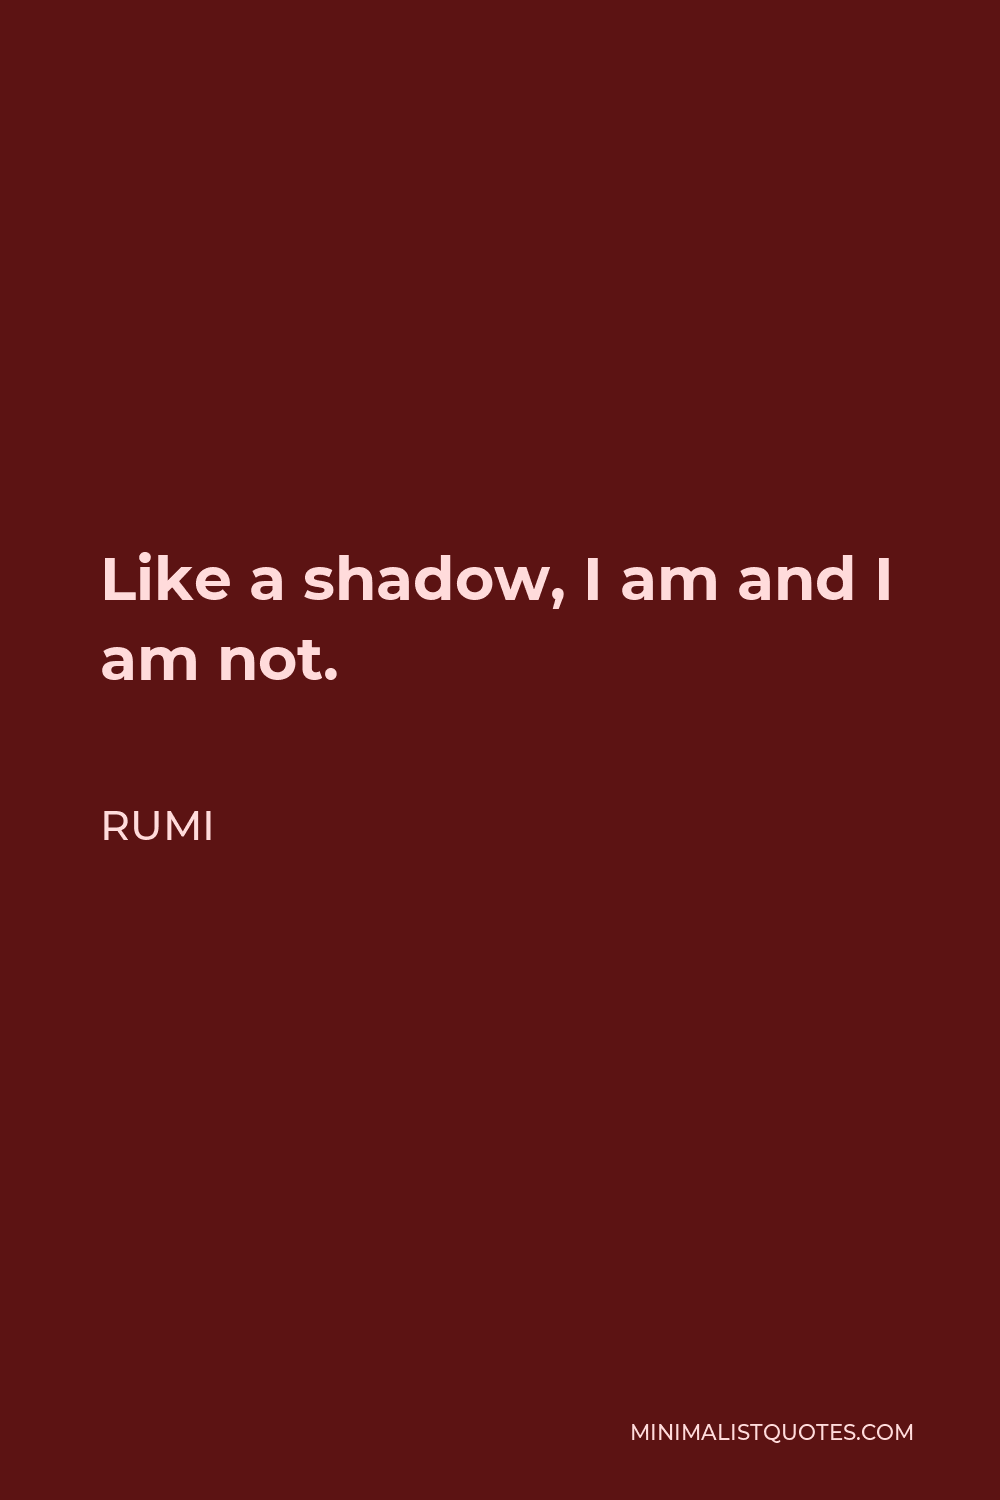 Rumi Quote - Like a shadow, I am and I am not.